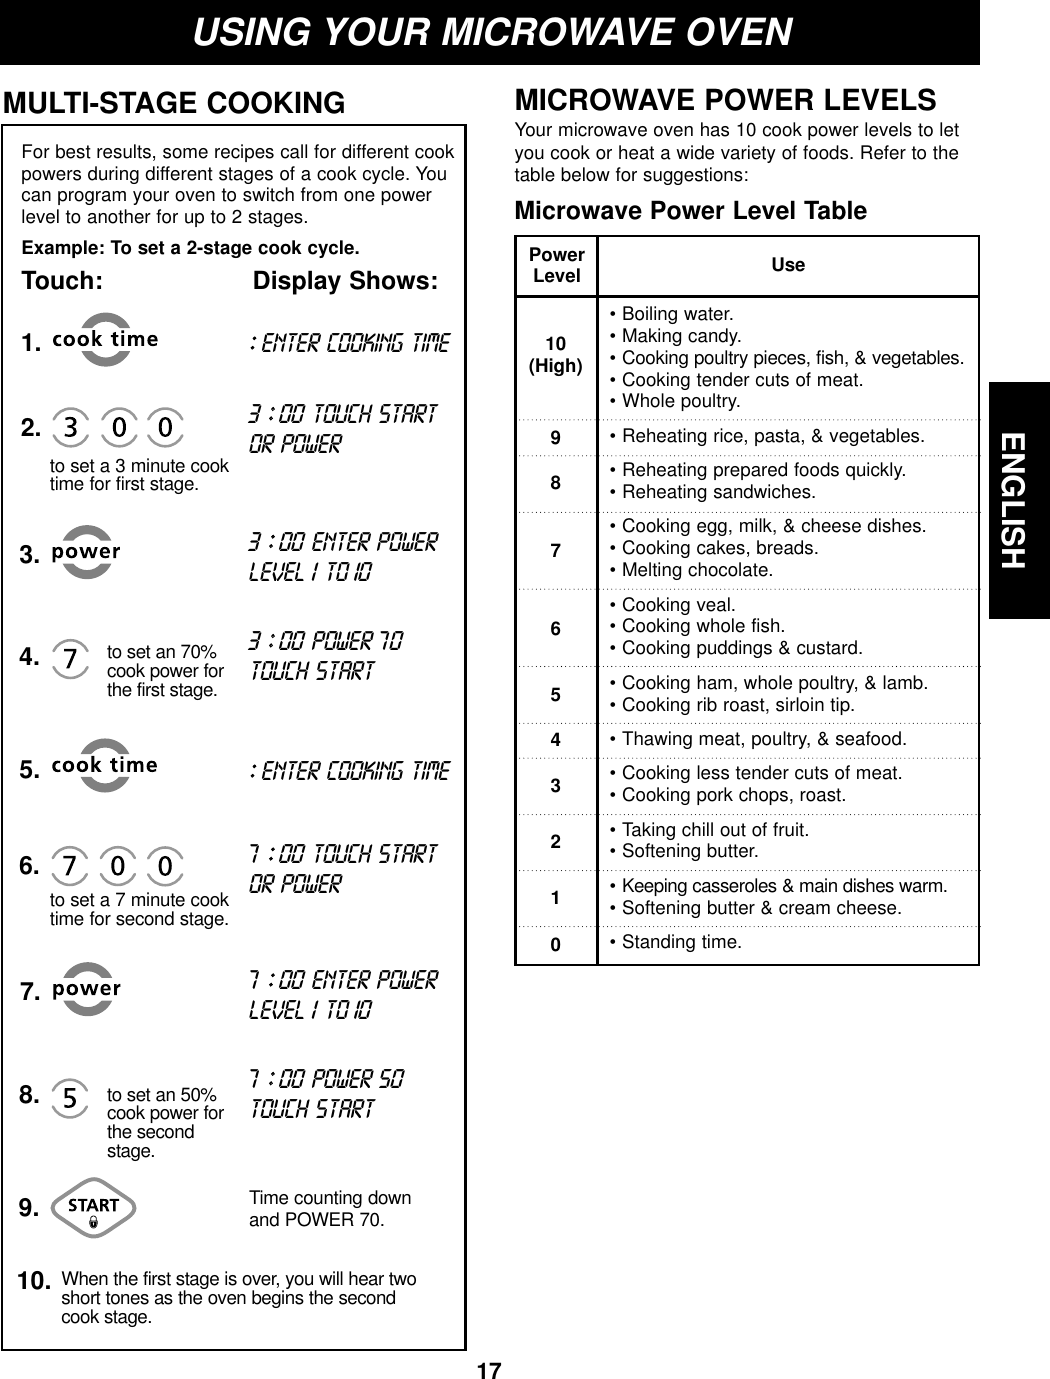 ENGLISH17USING YOUR MICROWAVE OVENMICROWAVE POWER LEVELSYour microwave oven has 10 cook power levels to letyou cook or heat a wide variety of foods. Refer to thetable below for suggestions:Microwave Power Level Table• Boiling water.• Making candy.• Cooking poultry pieces, fish, &amp; vegetables.• Cooking tender cuts of meat.• Whole poultry.• Reheating rice, pasta, &amp; vegetables.• Reheating prepared foods quickly.• Reheating sandwiches.• Cooking egg, milk, &amp; cheese dishes.• Cooking cakes, breads.• Melting chocolate.• Cooking veal.• Cooking whole fish.• Cooking puddings &amp; custard.• Cooking ham, whole poultry, &amp; lamb.• Cooking rib roast, sirloin tip.• Thawing meat, poultry, &amp; seafood.• Cooking less tender cuts of meat.• Cooking pork chops, roast.• Taking chill out of fruit.• Softening butter.• Keeping casseroles &amp; main dishes warm.• Softening butter &amp; cream cheese.• Standing time.10(High)9876543210UsePowerLevelFor best results, some recipes call for different cookpowers during different stages of a cook cycle. Youcan program your oven to switch from one powerlevel to another for up to 2 stages.Example: To set a 2-stage cook cycle.Touch: Display Shows:MULTI-STAGE COOKING1.2.5.3.4.6.to set a 7 minute cook time for second stage.to set a 3 minute cook time for first stage.7.9.::ENTER COOKING TIME::ENTER COOKING TIME3 ::00TOUCH STARTOR POWER7 ::00TOUCH STARTOR POWER3 ::00 ENTER POWERLEVEL 1 TO107 ::00ENTER POWERLEVEL 1 TO103 ::00 POWER 70TOUCH START8. to set an 50% cook power for the secondstage.to set an 70% cook power for the first stage.7 ::00 POWER 50TOUCH STARTWhen the first stage is over, you will hear twoshort tones as the oven begins the secondcook stage.10.Time counting downand POWER 70.